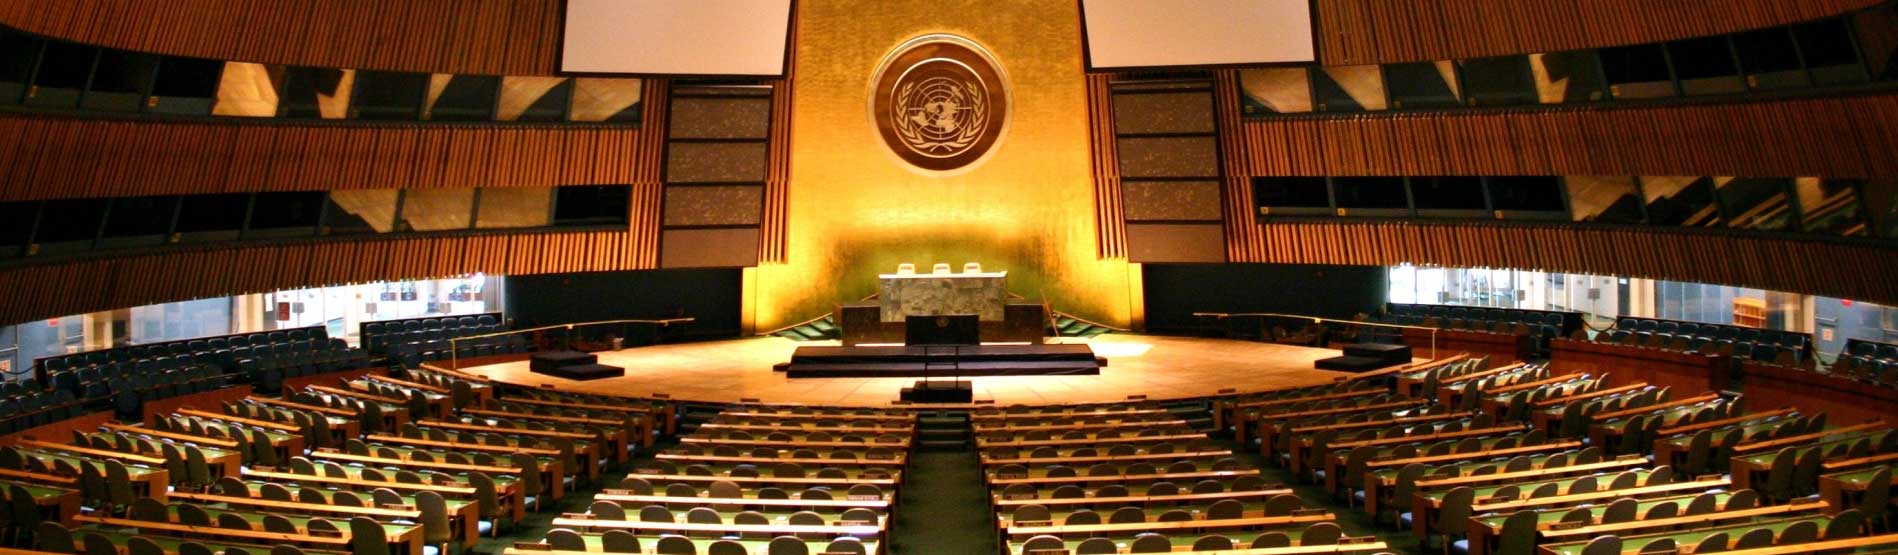 United Nations, General Assembly building